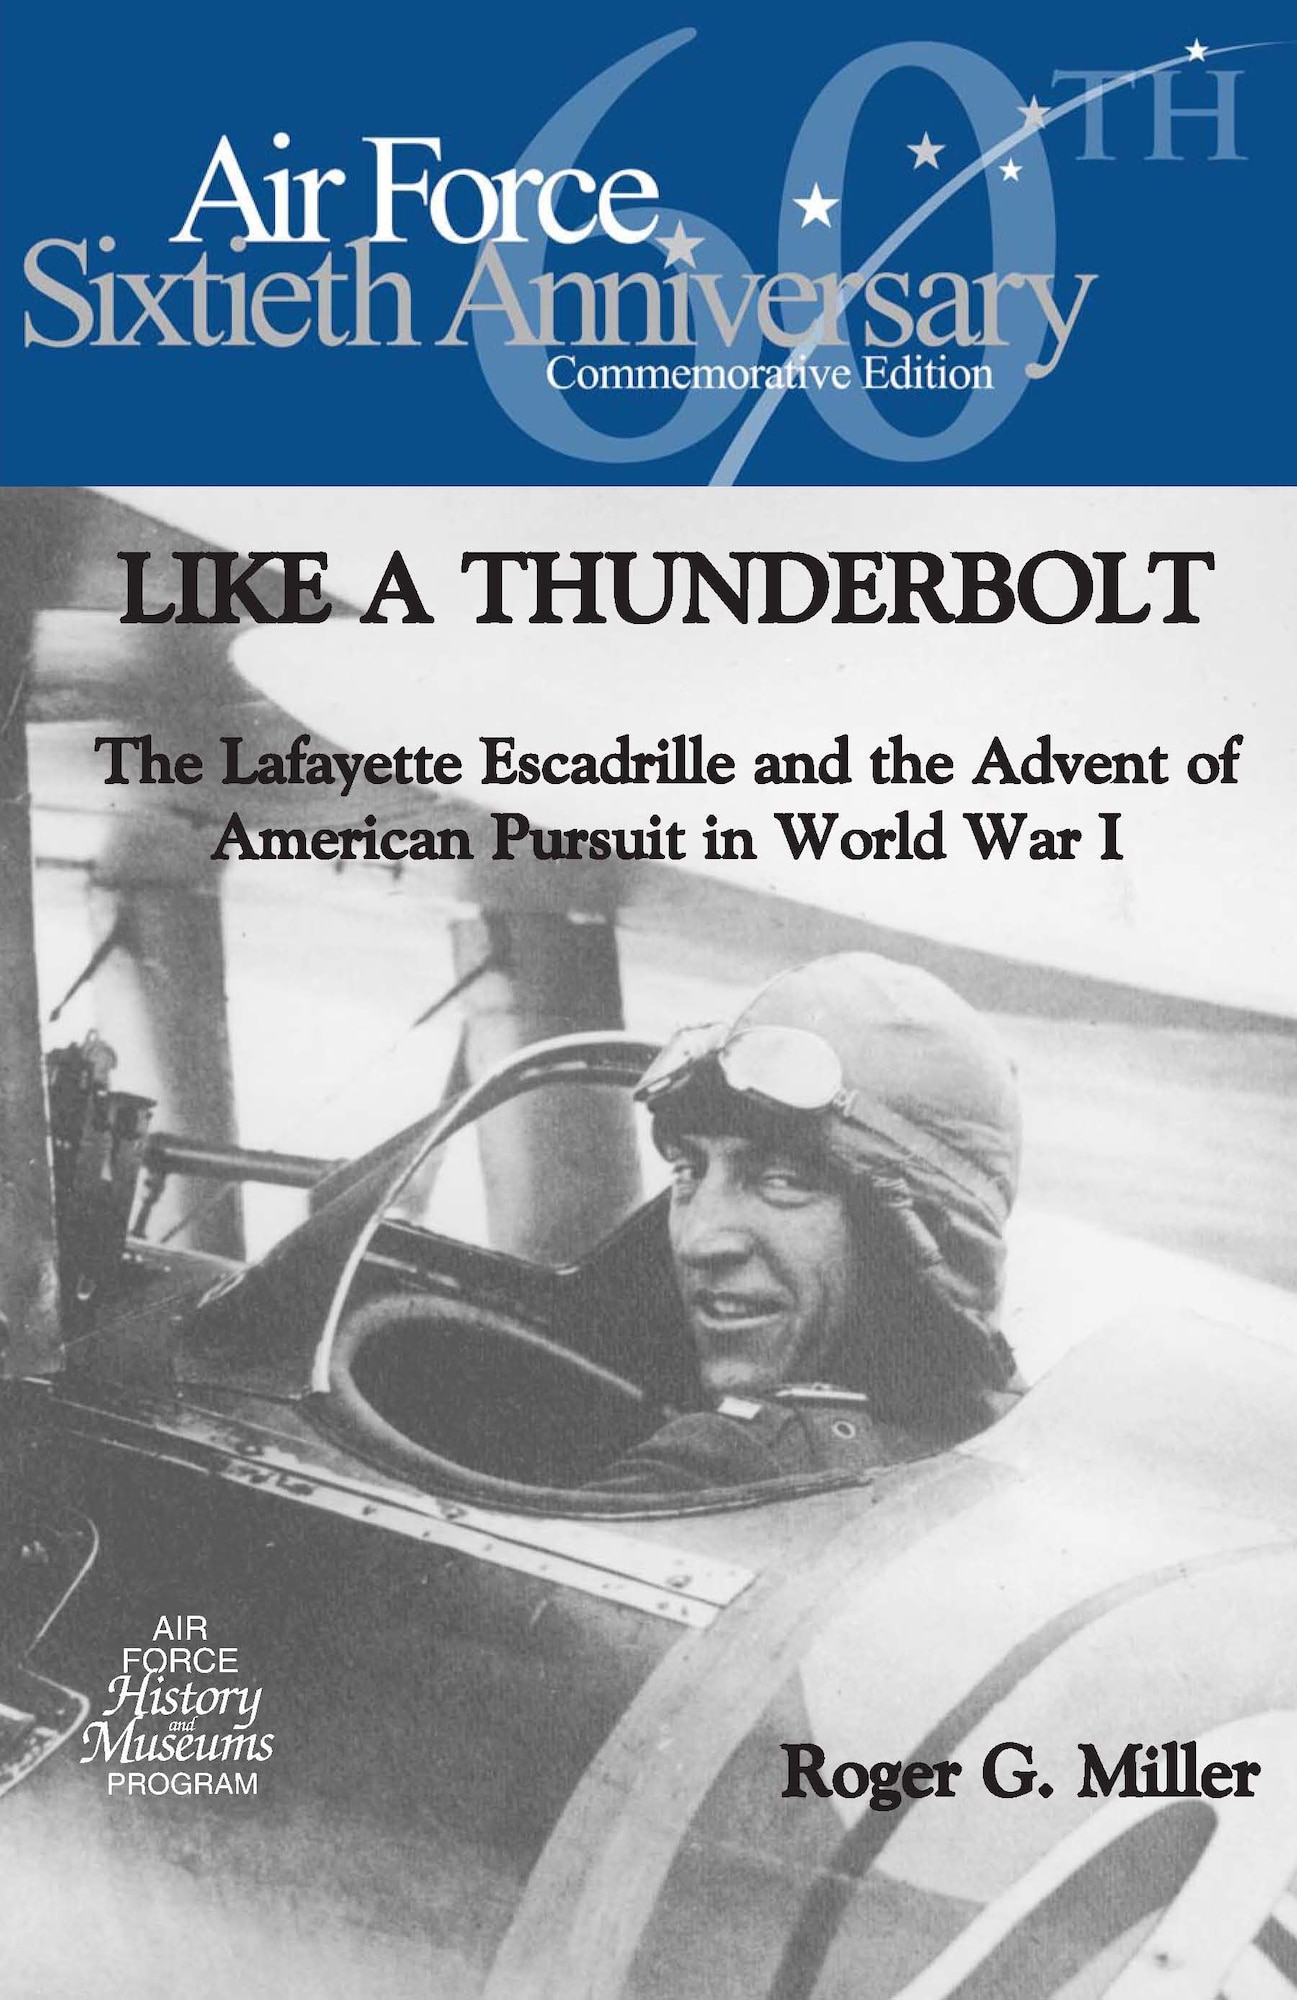 Like a Thunderbolt: the Lafayette Escadrille and the Advent of American Pursuit in World War I by Roger G. Miller